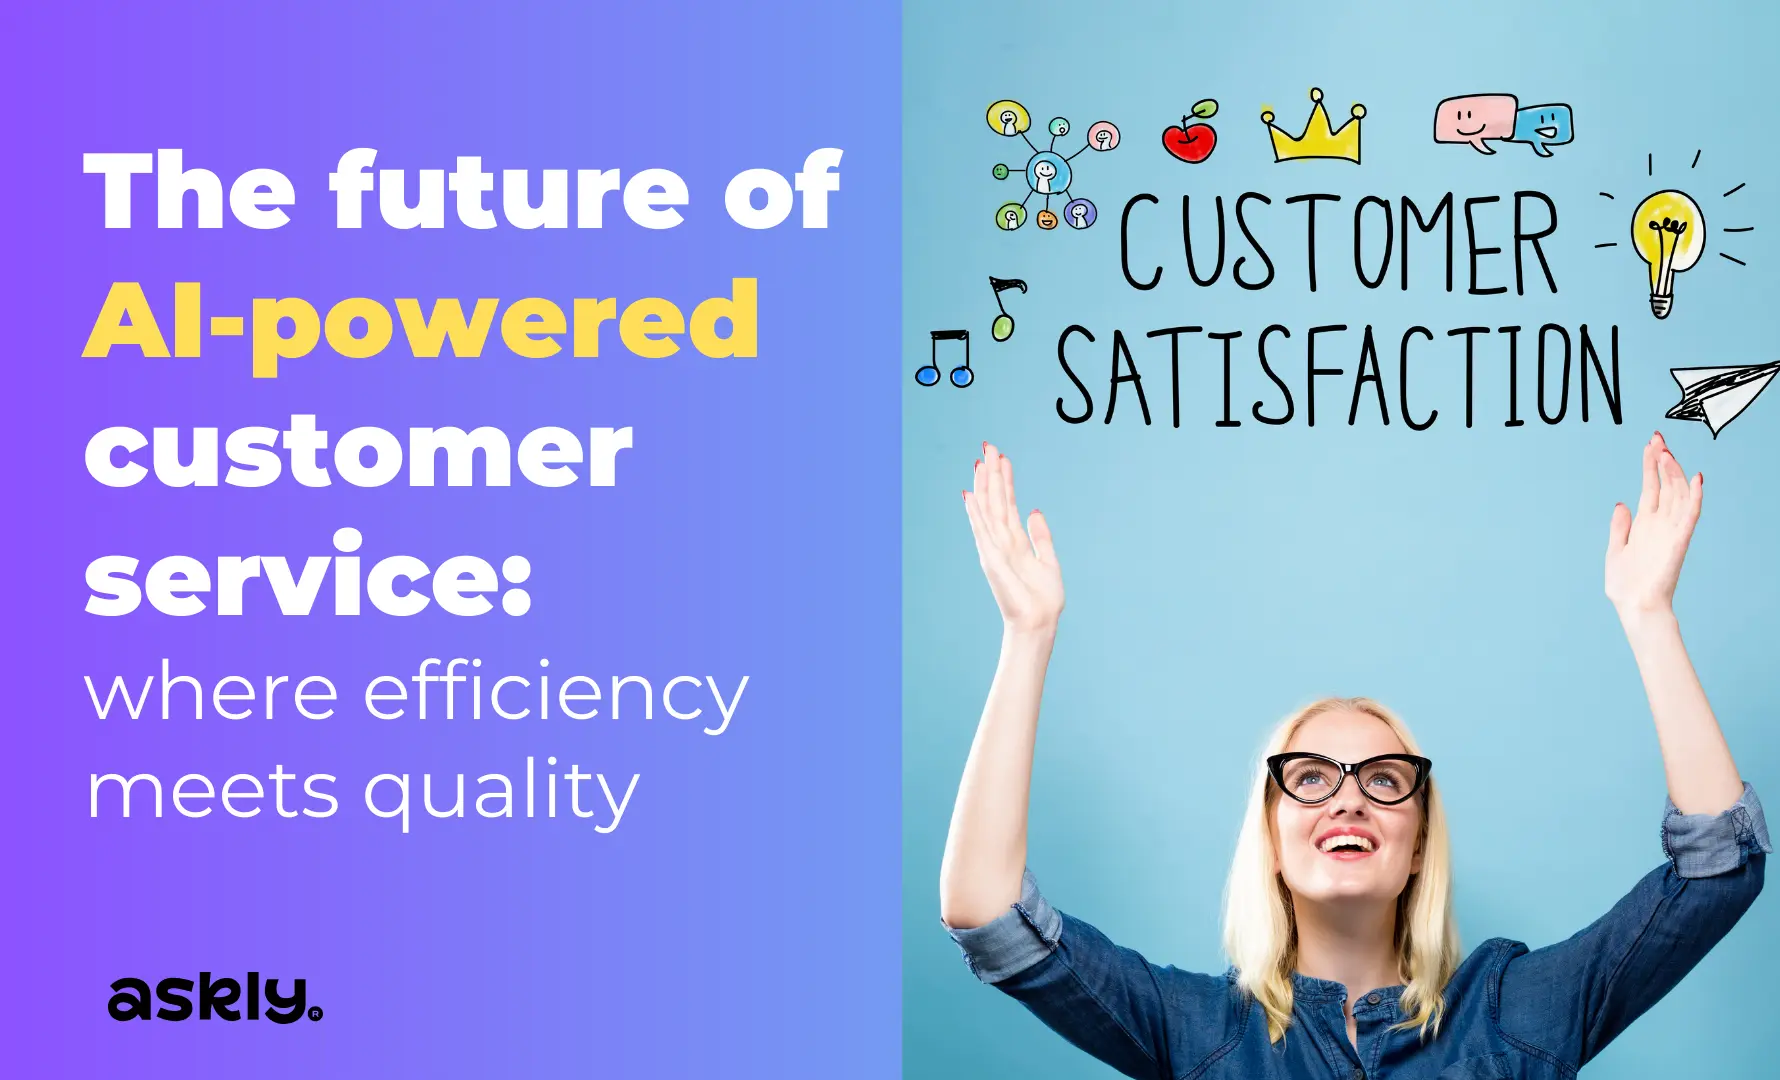 The future of AI-powered customer service: where efficiency meets quality